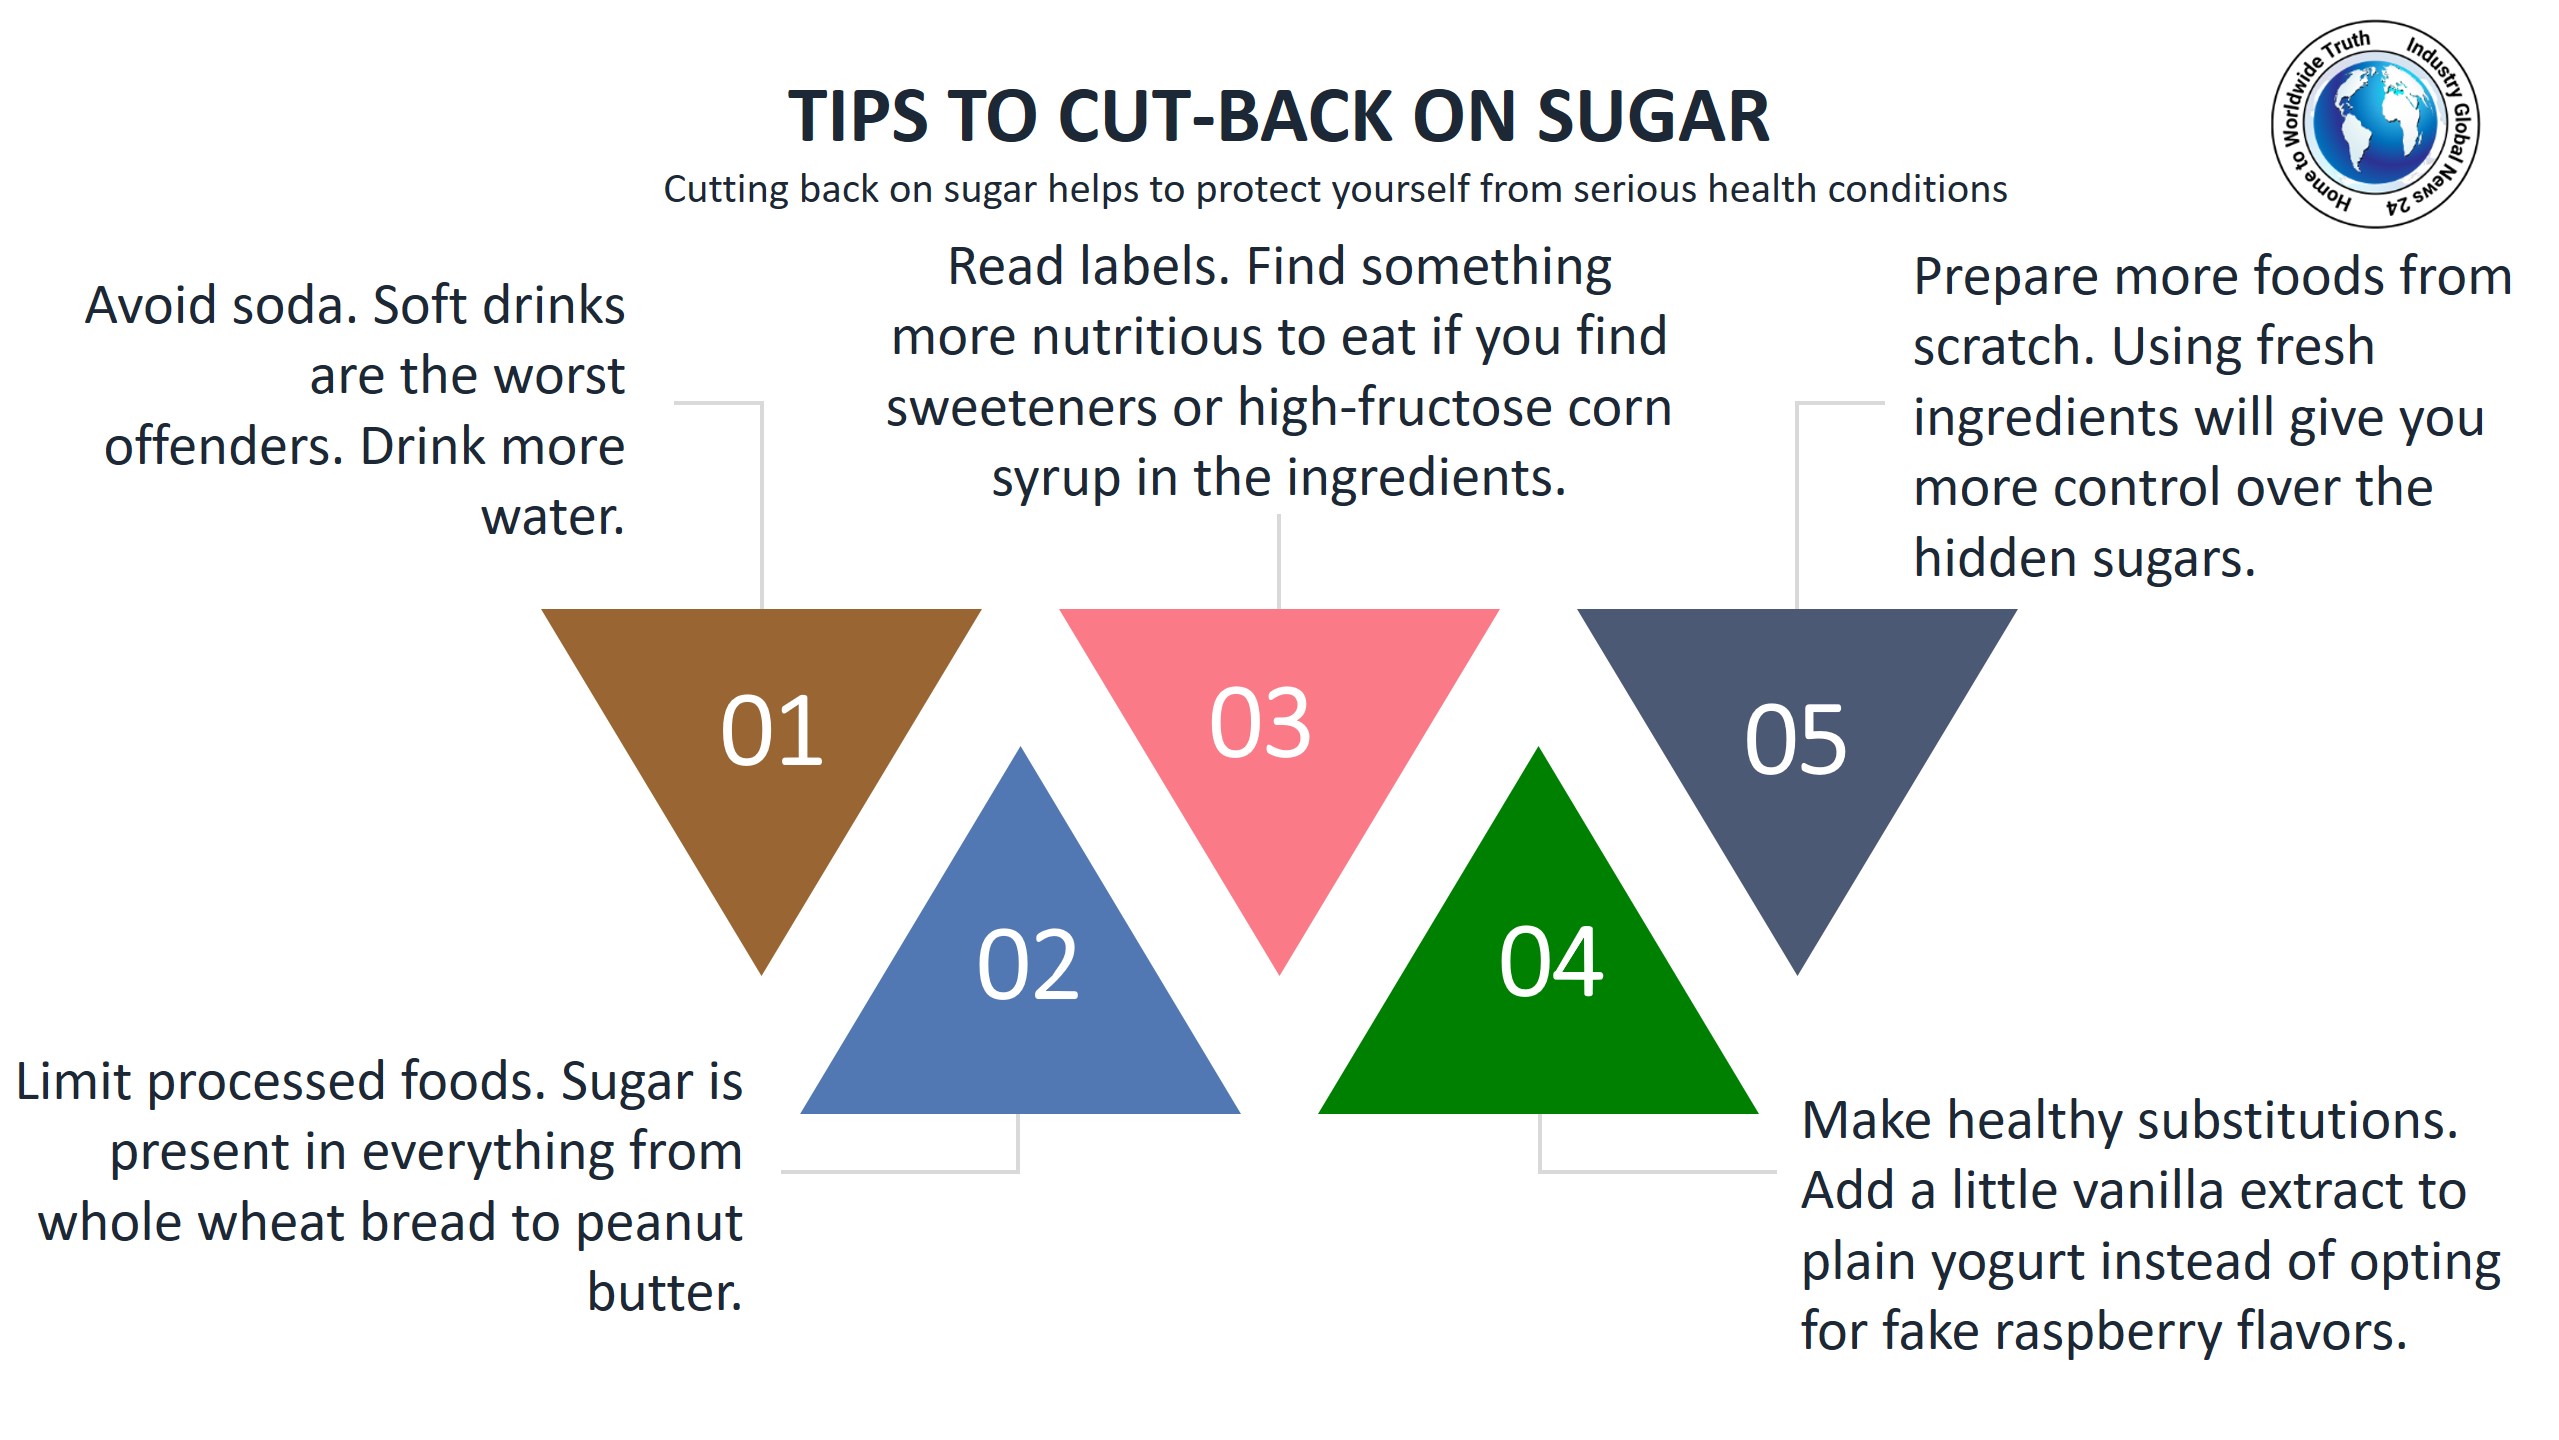 Tips to cut-back on sugar